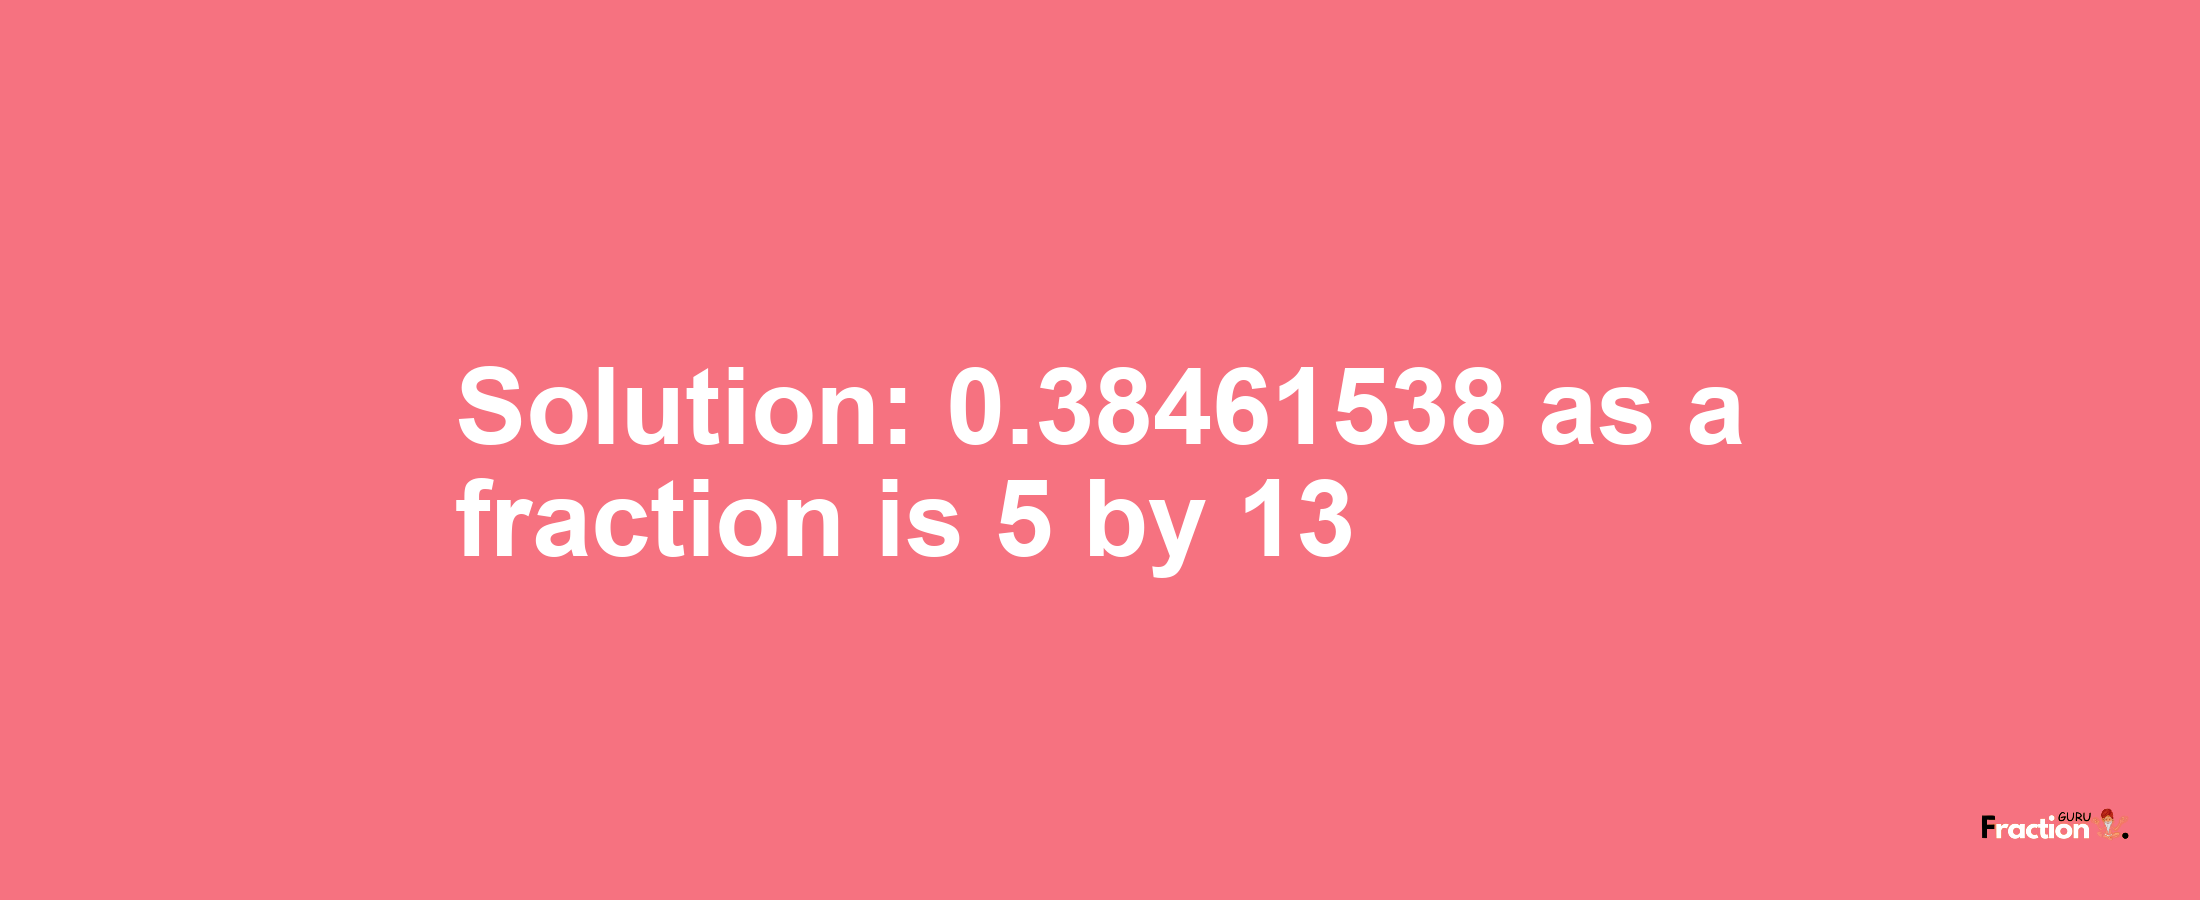 Solution:0.38461538 as a fraction is 5/13